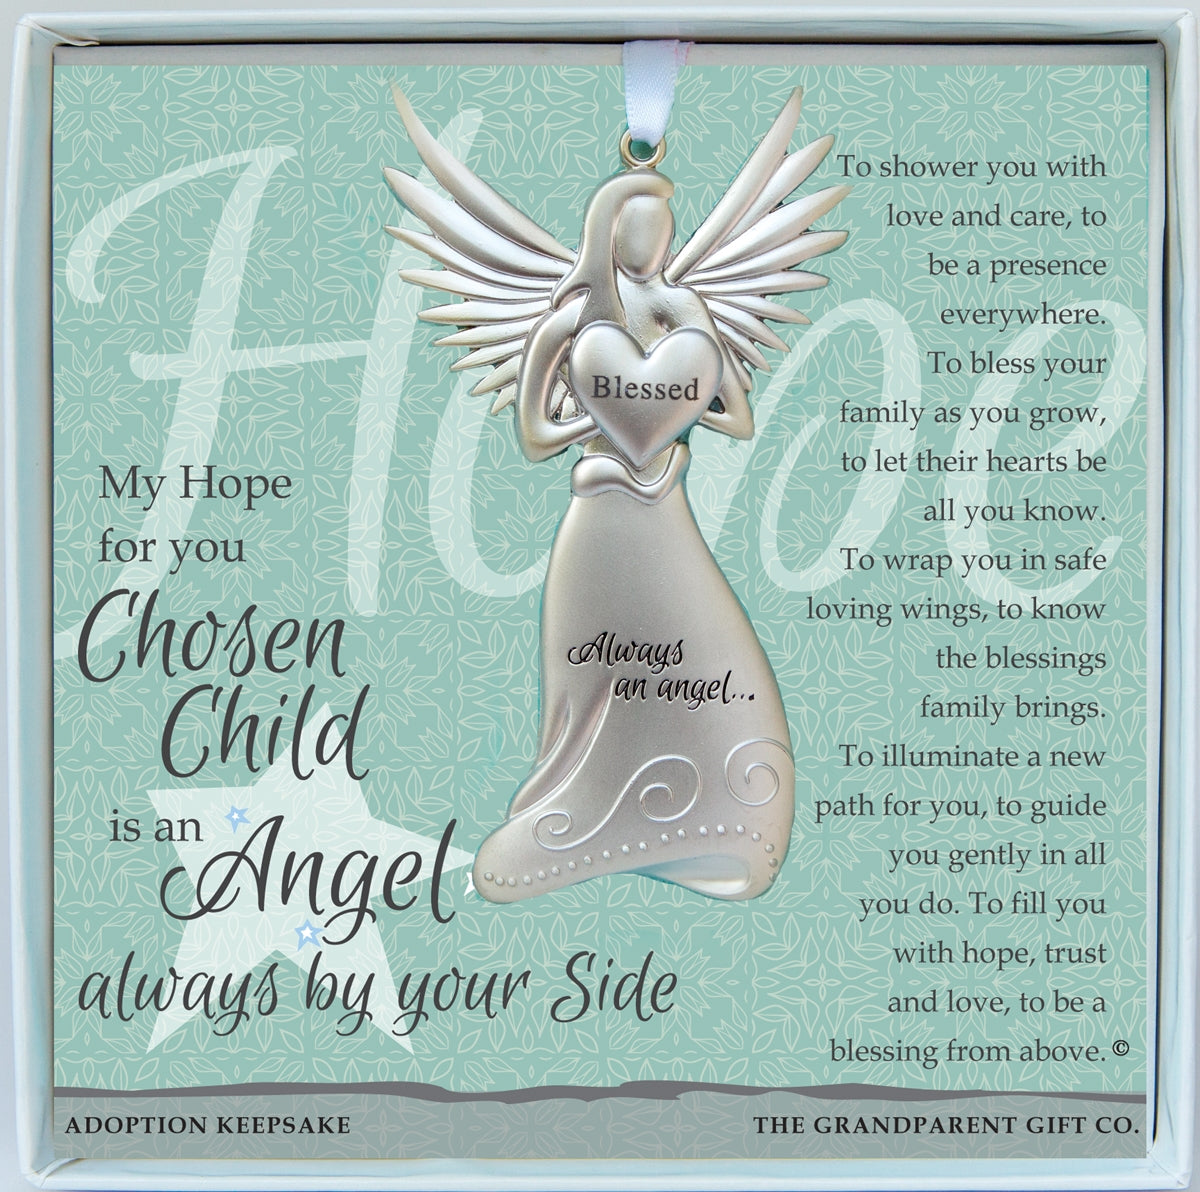 Adoption Gift - 4" metal blessed angel ornament with "Chosen Child" sentiment in white box with clear lid